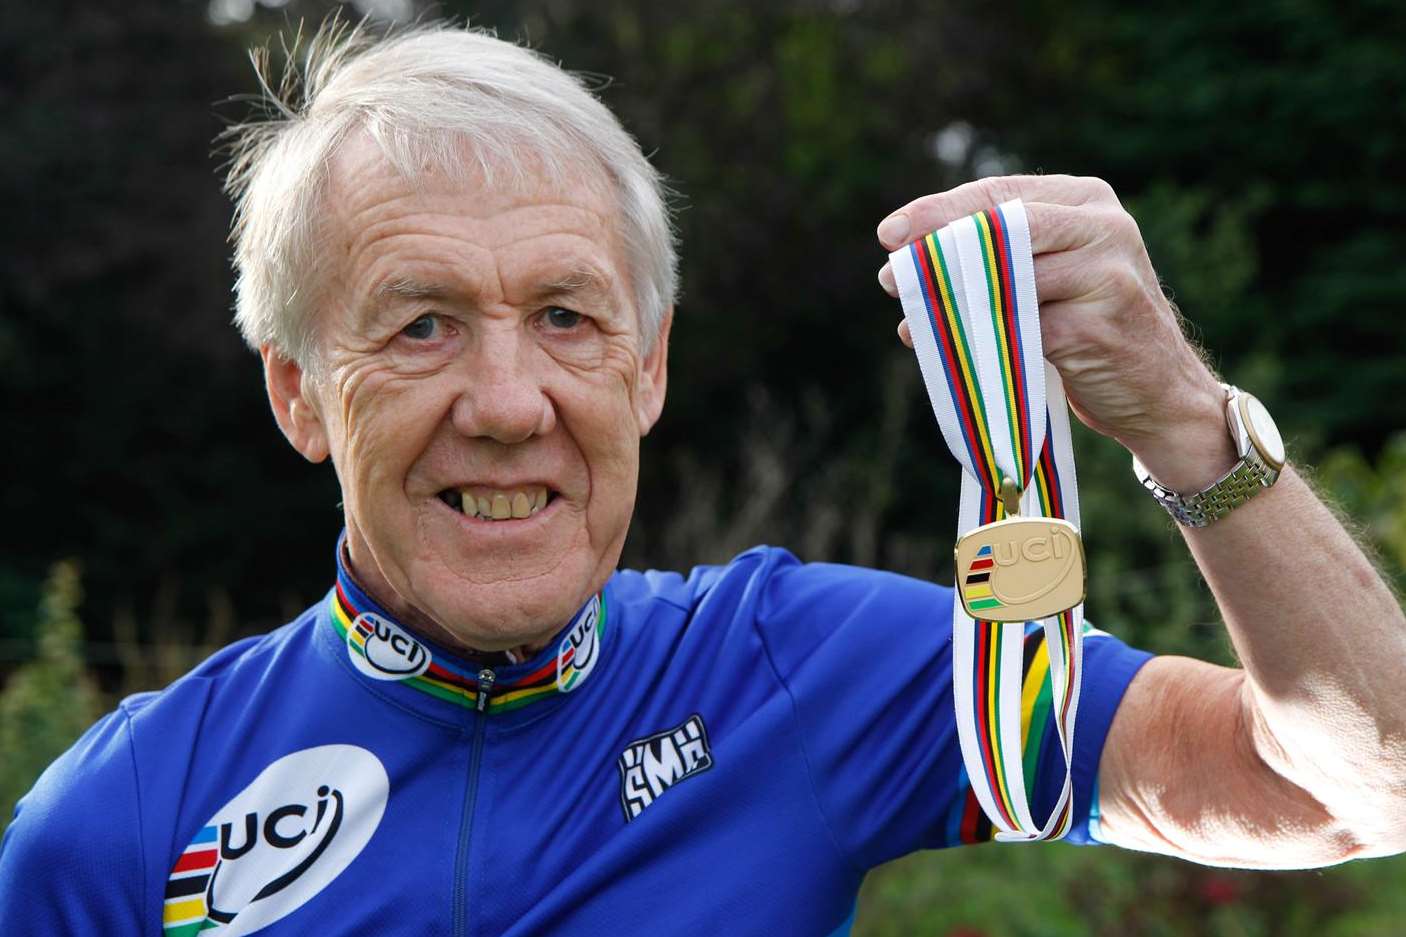 Alan Rowe with his medal